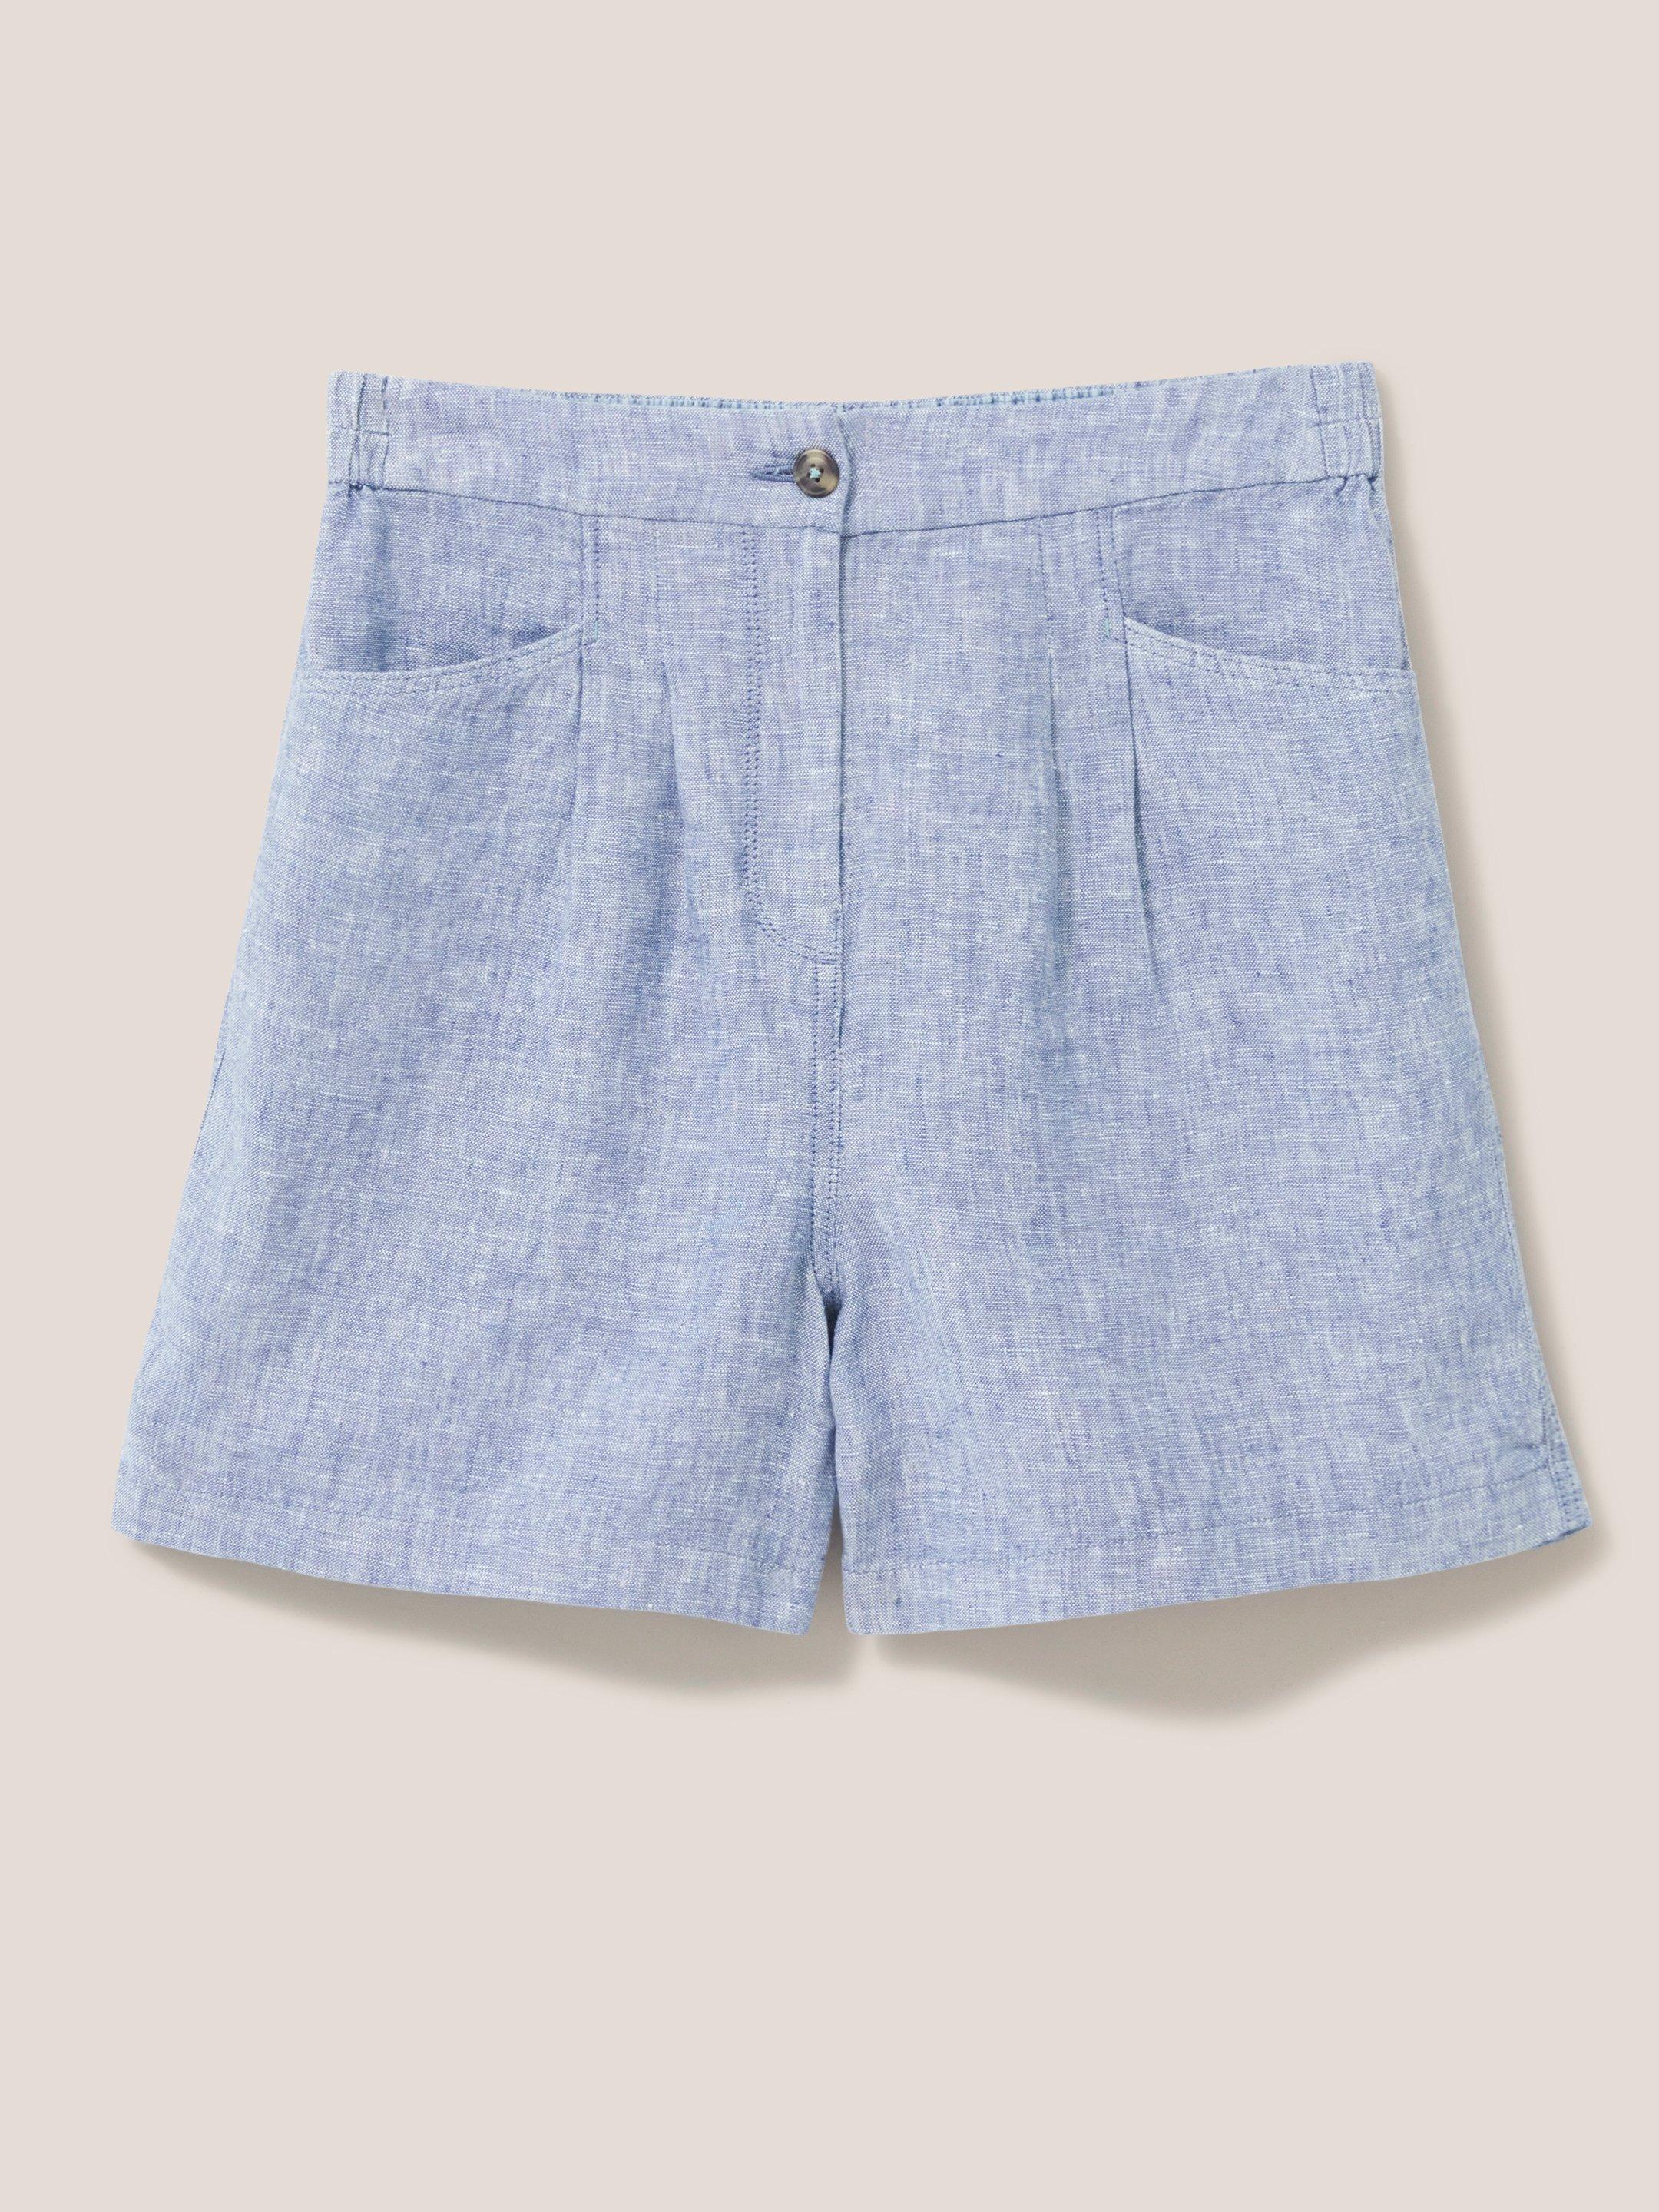 Rowena Linen Short in CHAMB BLUE - FLAT FRONT